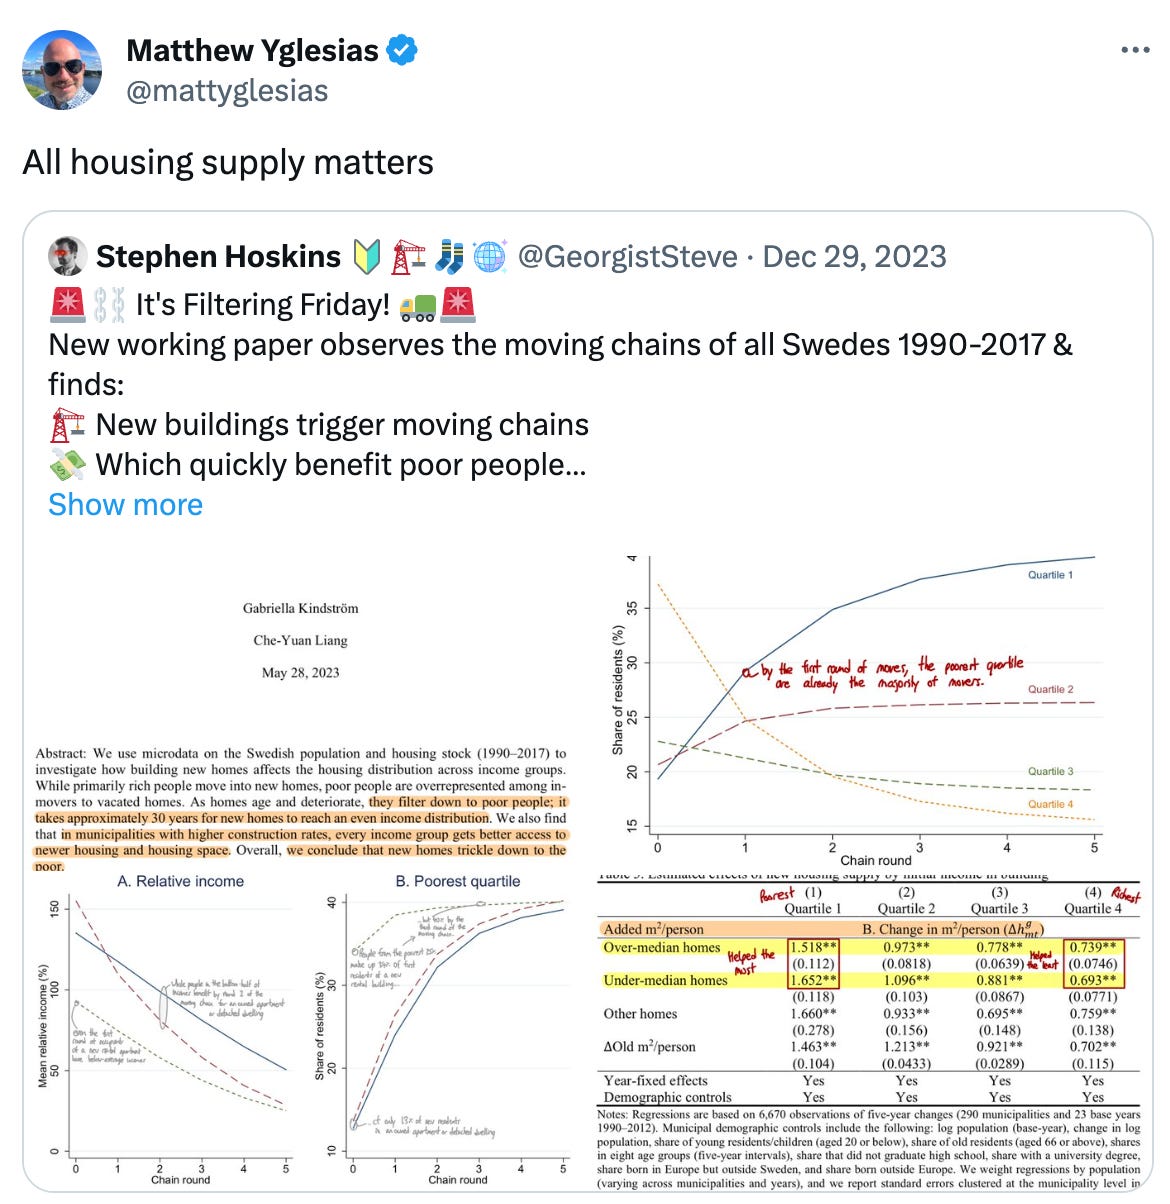  See new posts Conversation Matthew Yglesias @mattyglesias All housing supply matters Quote Stephen Hoskins 🔰🏗️🧦🪩 @GeorgistSteve · Dec 29, 2023 🚨⛓️ It's Filtering Friday! 🚛🚨 New working paper observes the moving chains of all Swedes 1990-2017 & finds: 🏗️ New buildings trigger moving chains 💸 Which quickly benefit poor people 🌇 Rental apartments filter fastest 🏘️ Even luxury housing helps poor people get larger homes Show more